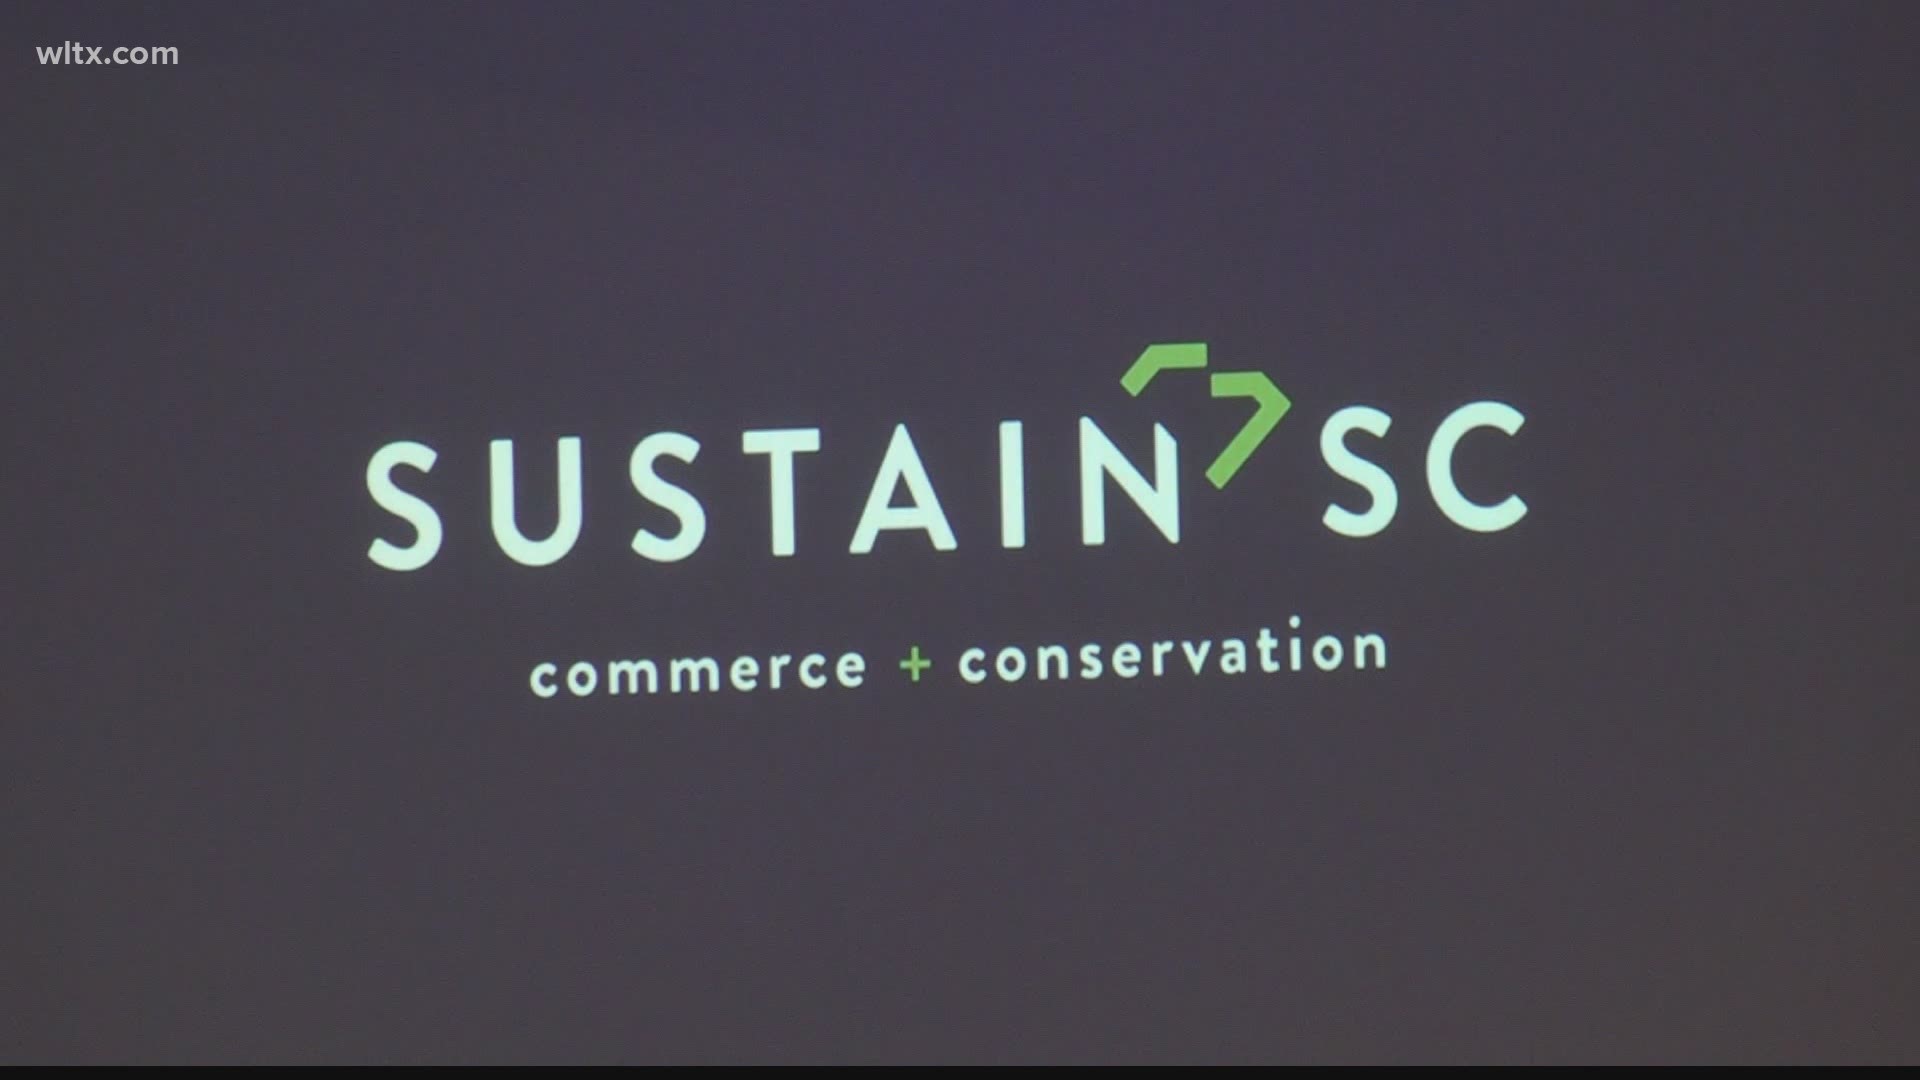 SustainSC talked through ideas about how to grow business and protect the environment at the same time.